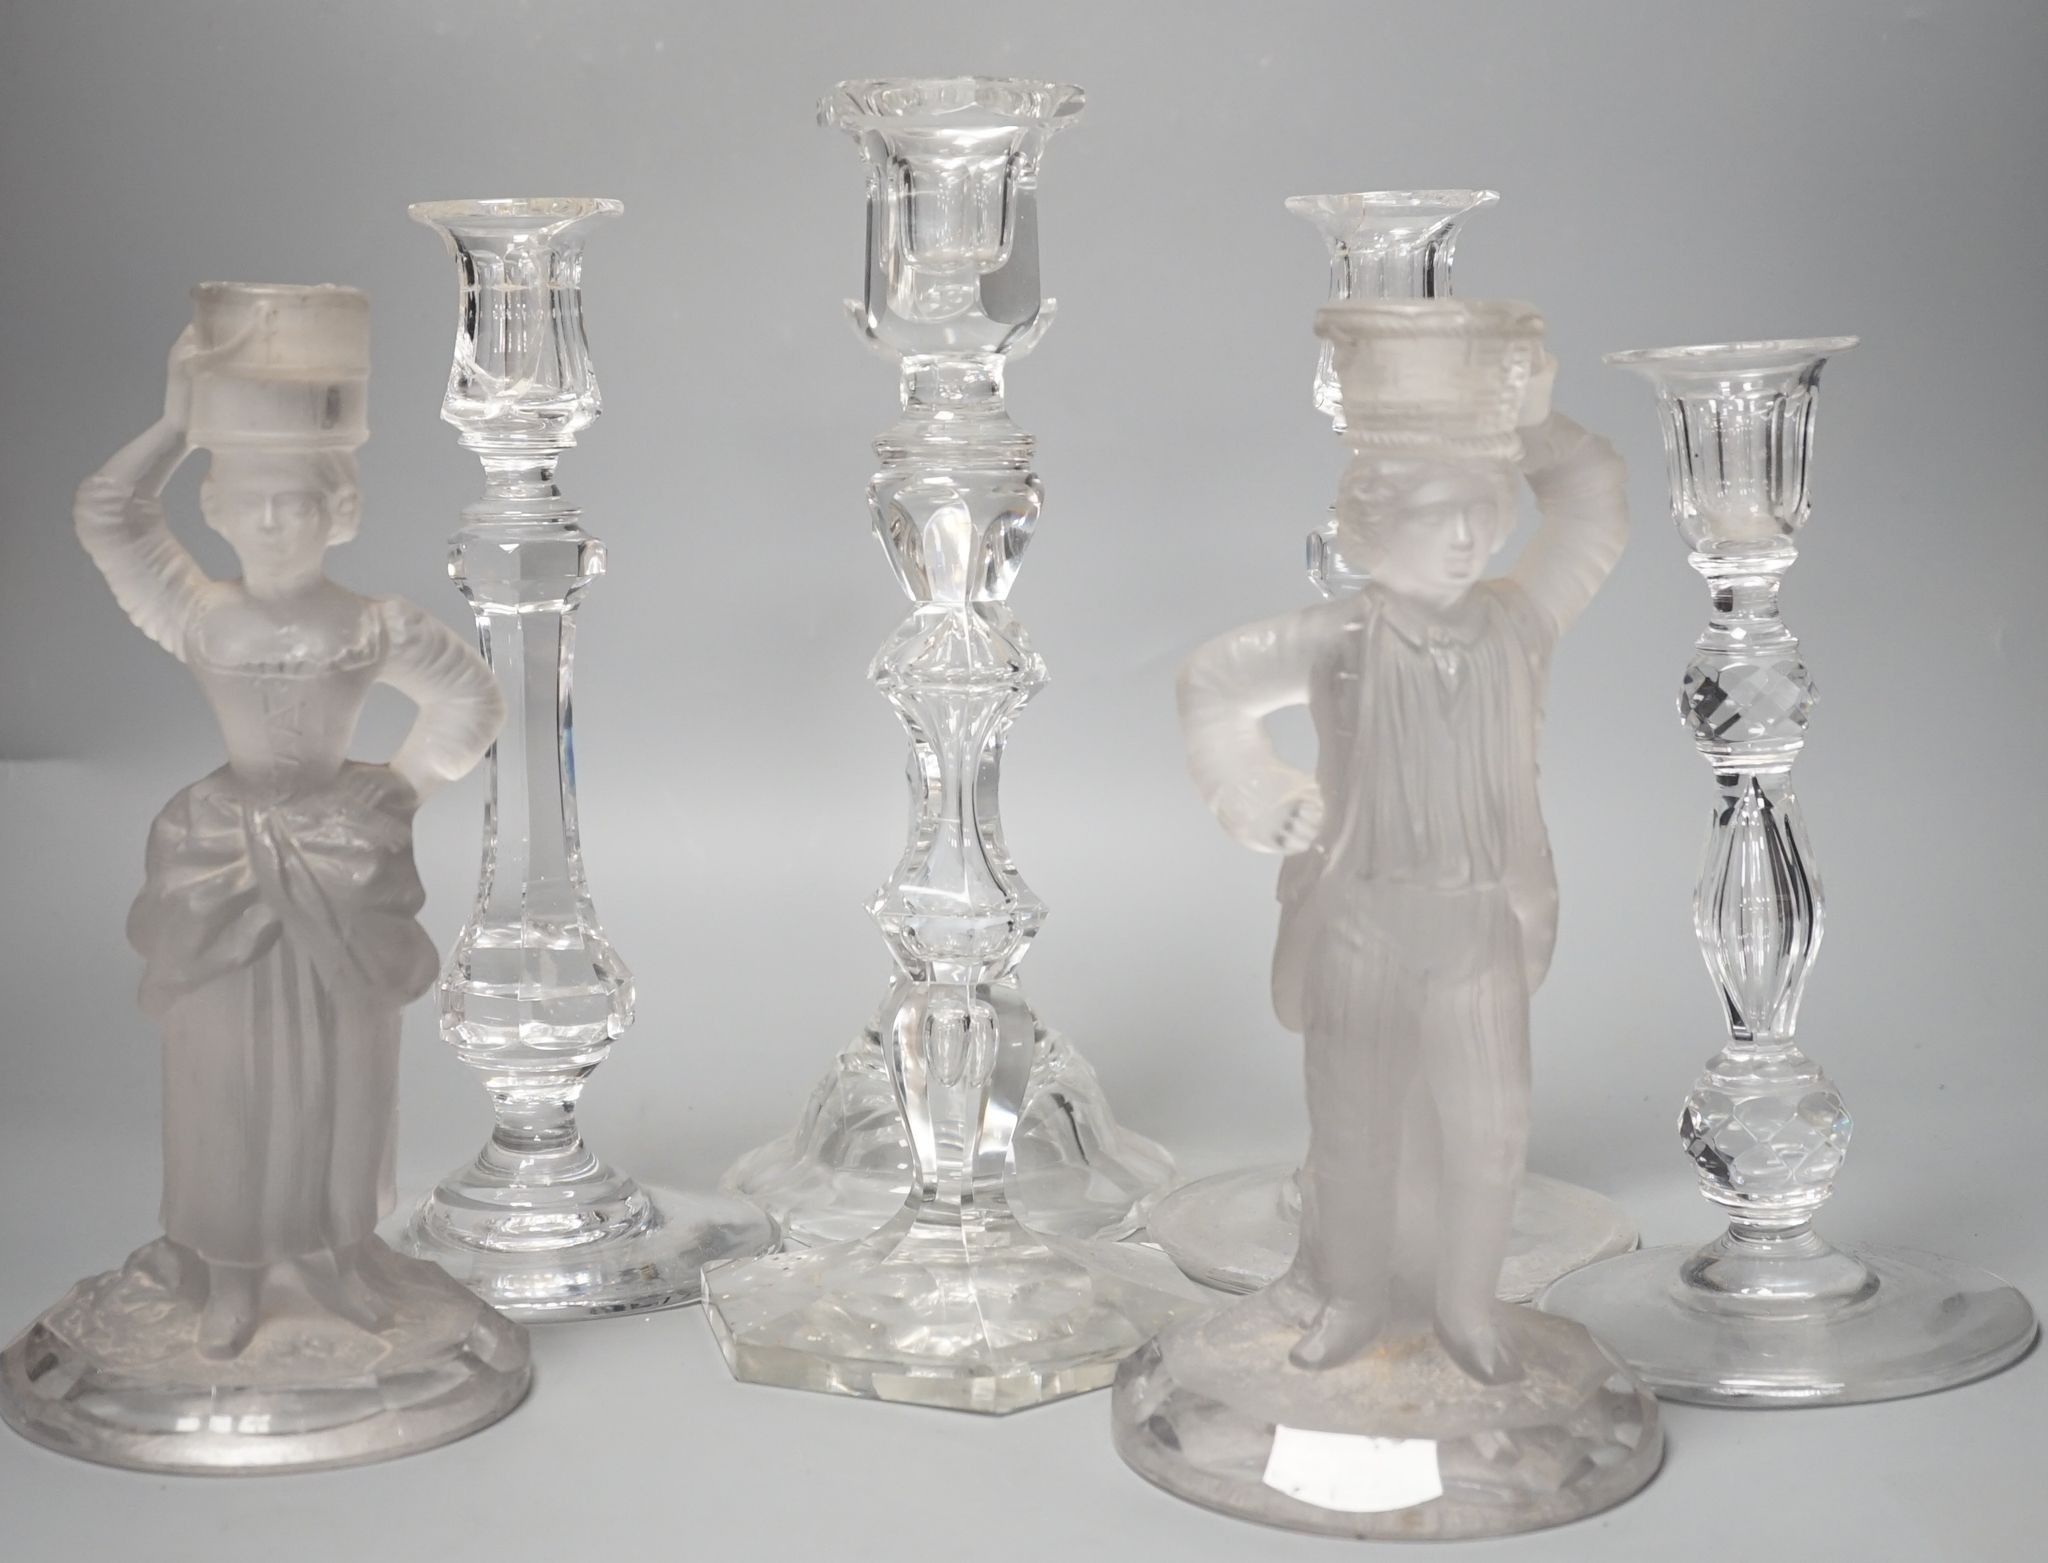 Five various cut glass candlesticks, a pair of John Ford, Holyrood Glass Works, Edinburgh figural frosted glass candlesticks and a lustre drop bag chandelier